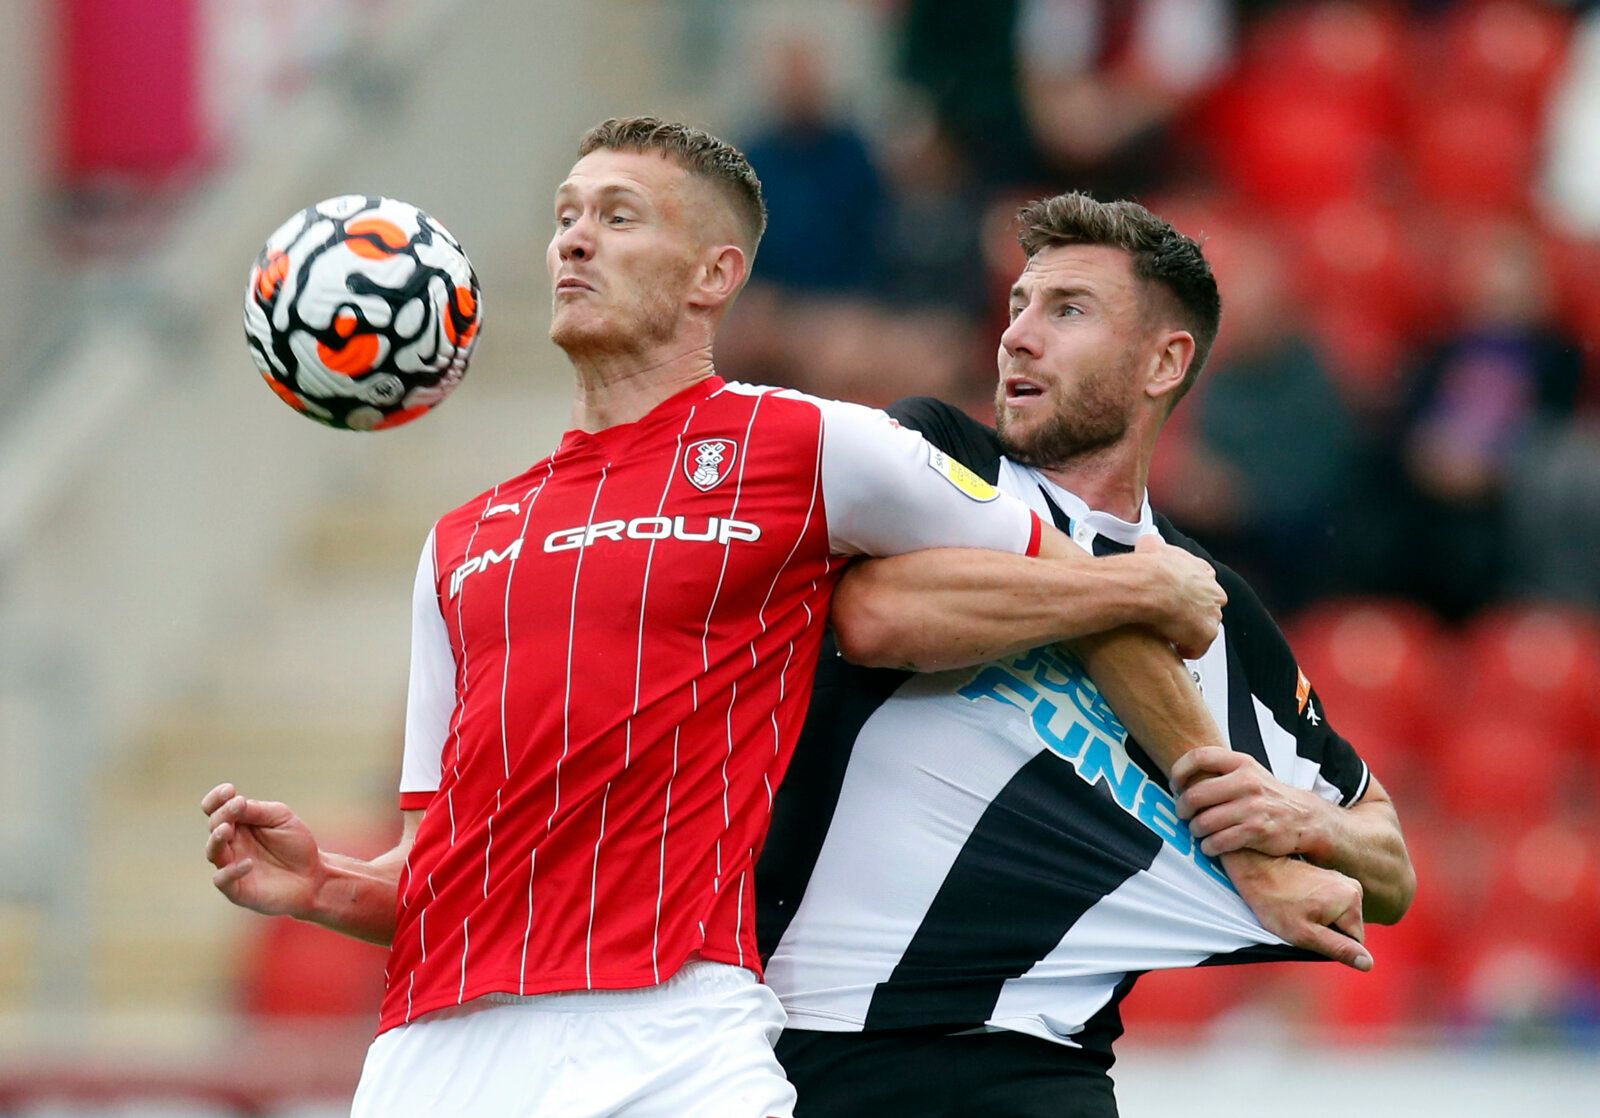 Soccer Football - Pre Season Friendly - Rotherham United v Newcastle United - AESSEAL New York Stadium, Rotherham, Britain - July 27, 2021 Rotherham United's Michael Smith in action with Newcastle United's Paul Dummett Action Images via Reuters/Ed Sykes